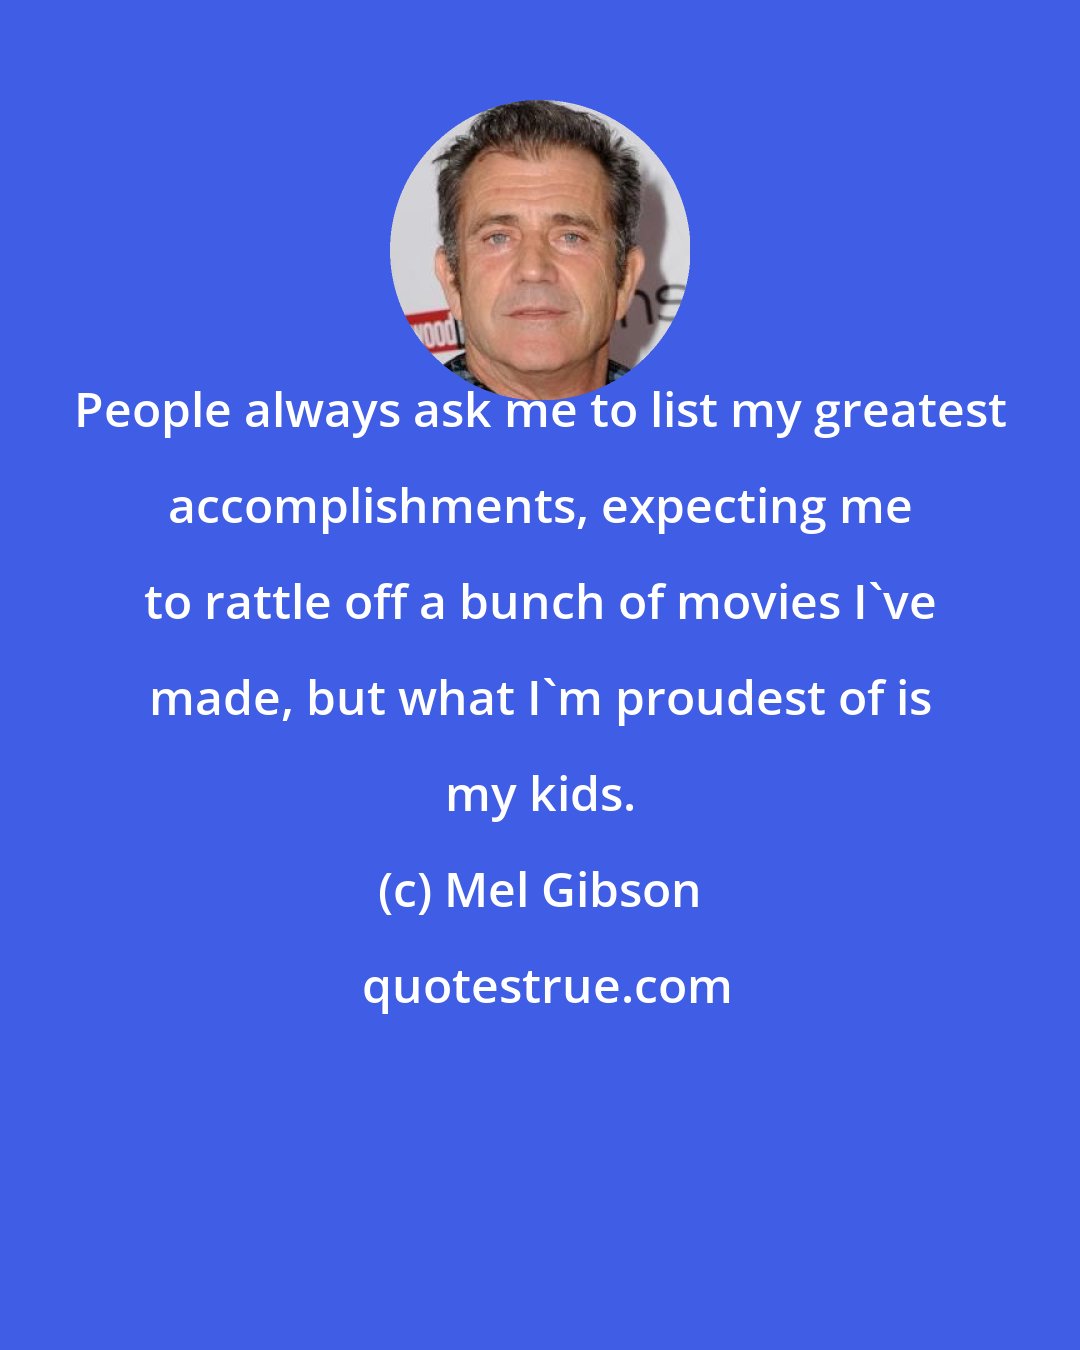 Mel Gibson: People always ask me to list my greatest accomplishments, expecting me to rattle off a bunch of movies I've made, but what I'm proudest of is my kids.